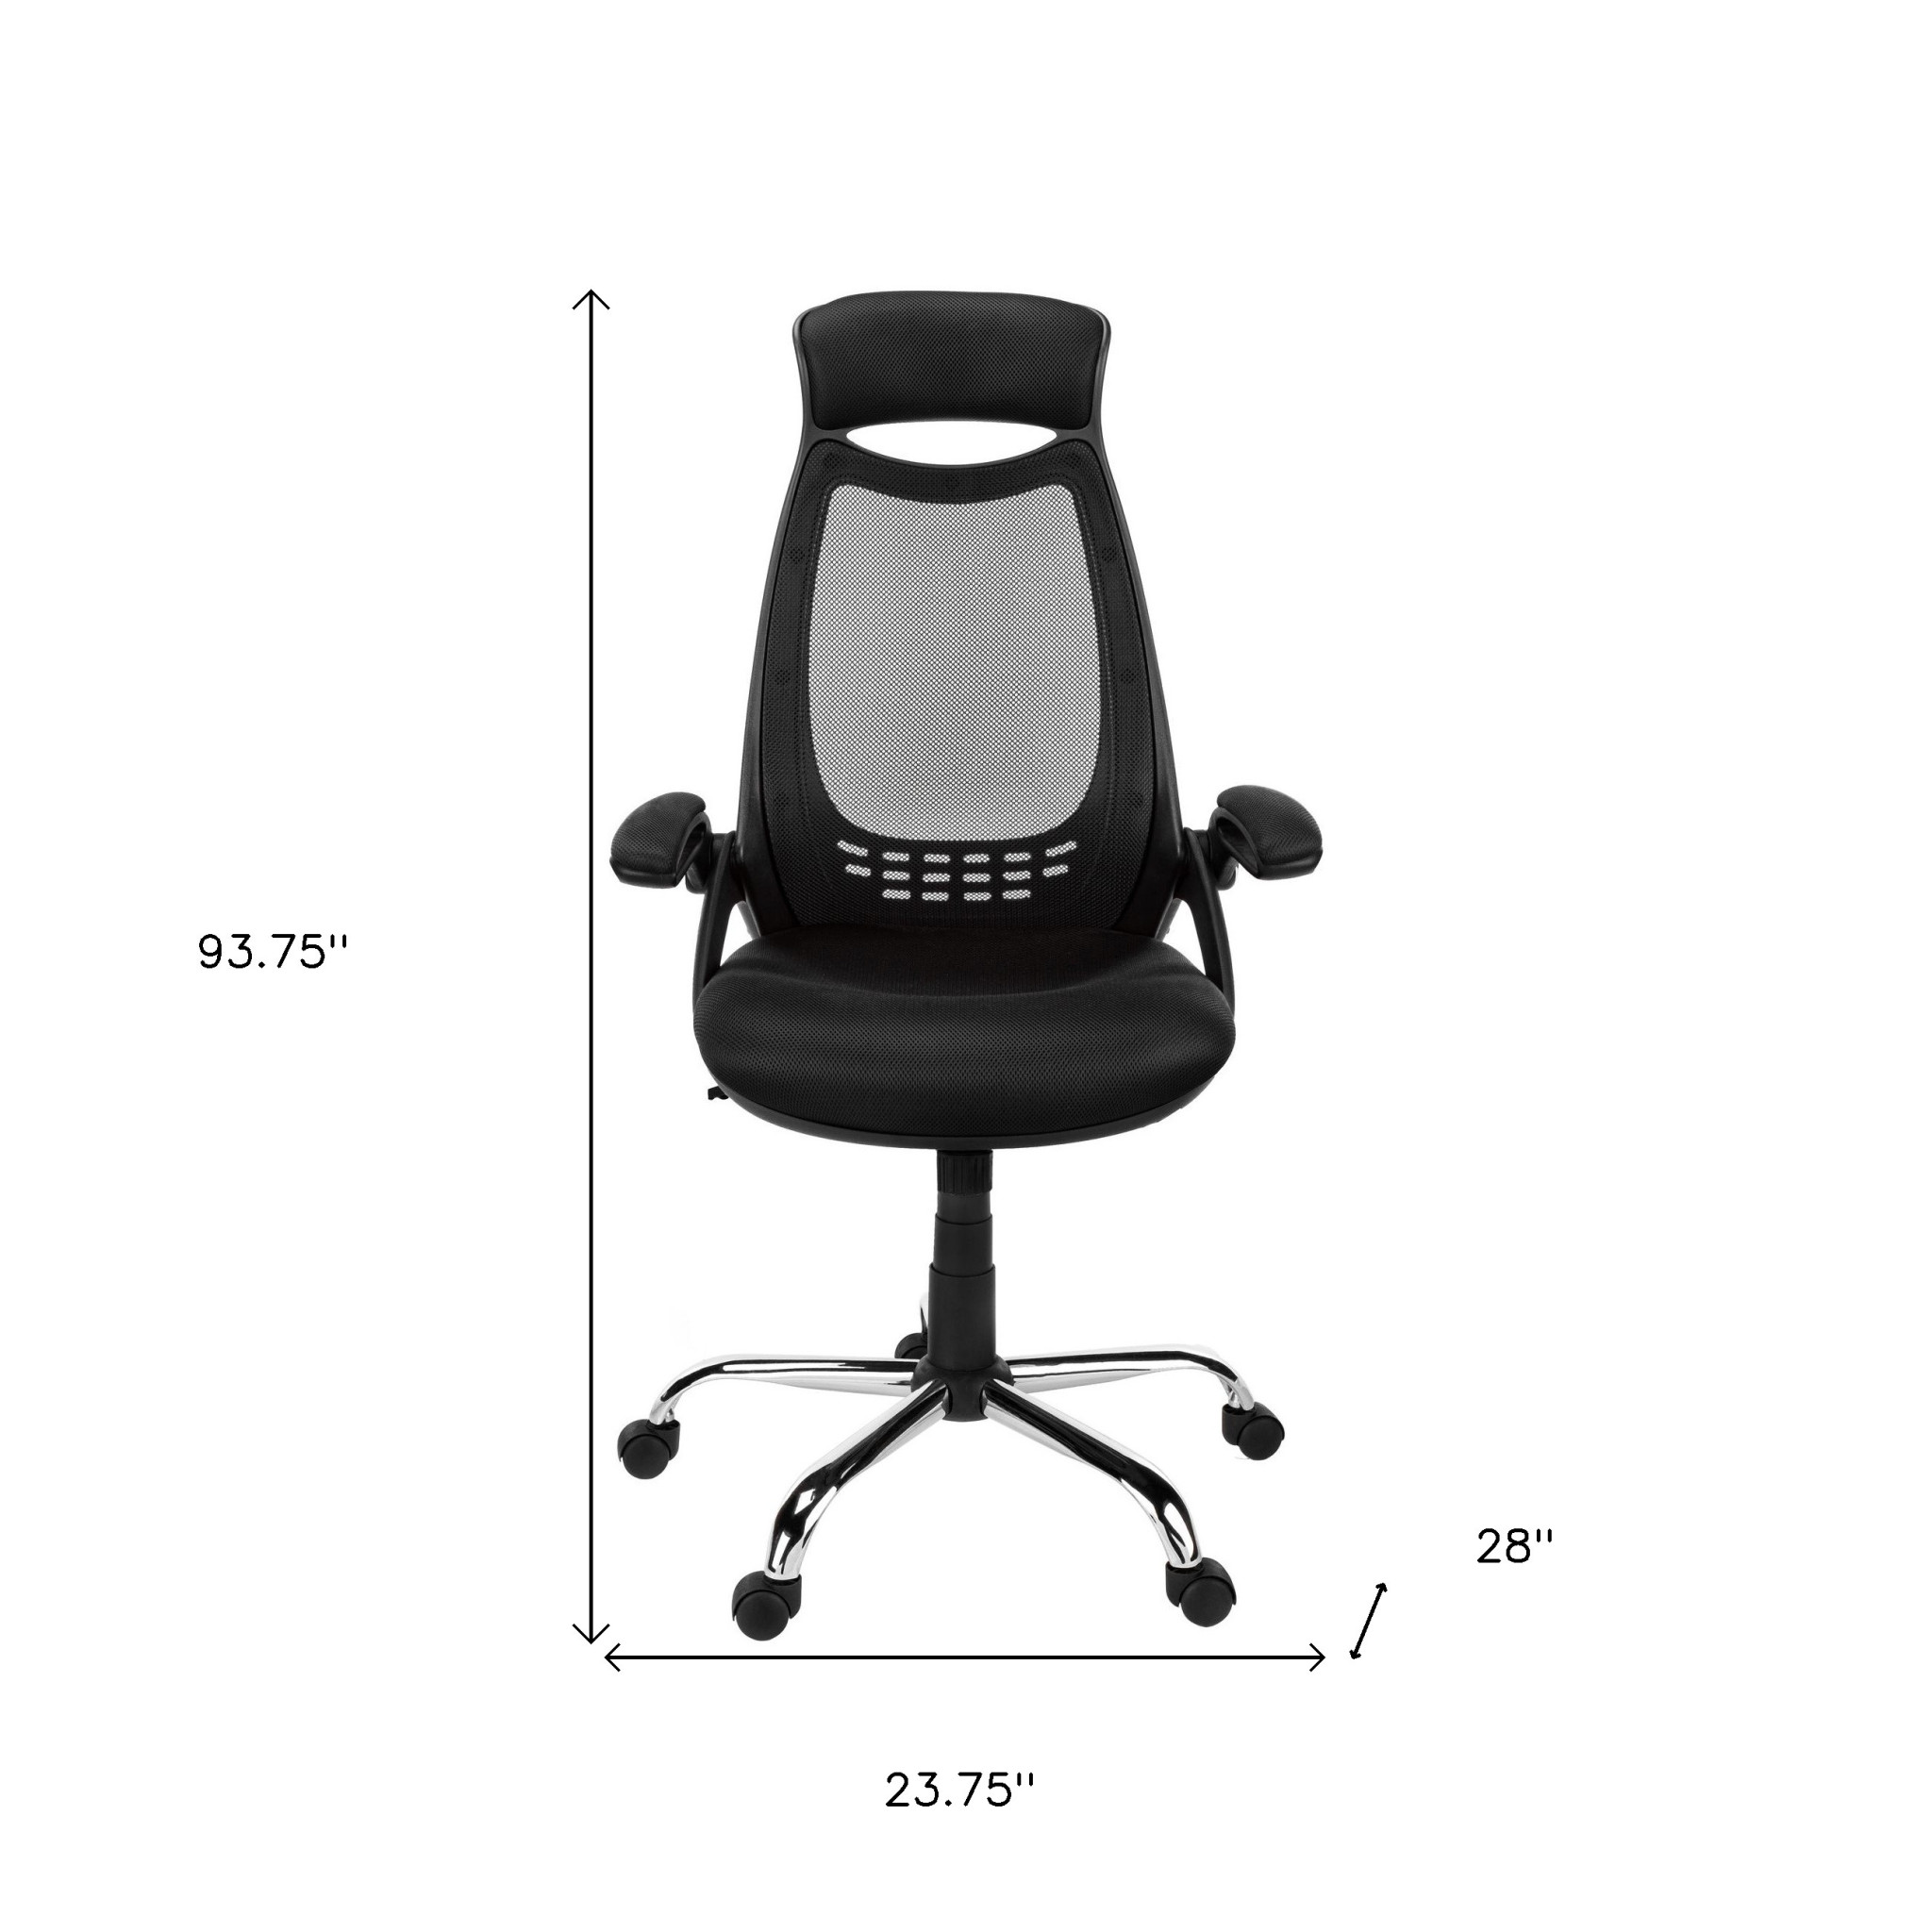 23.75" x 28" x 93.75" Black Foam Metal Office Chair With A High Back